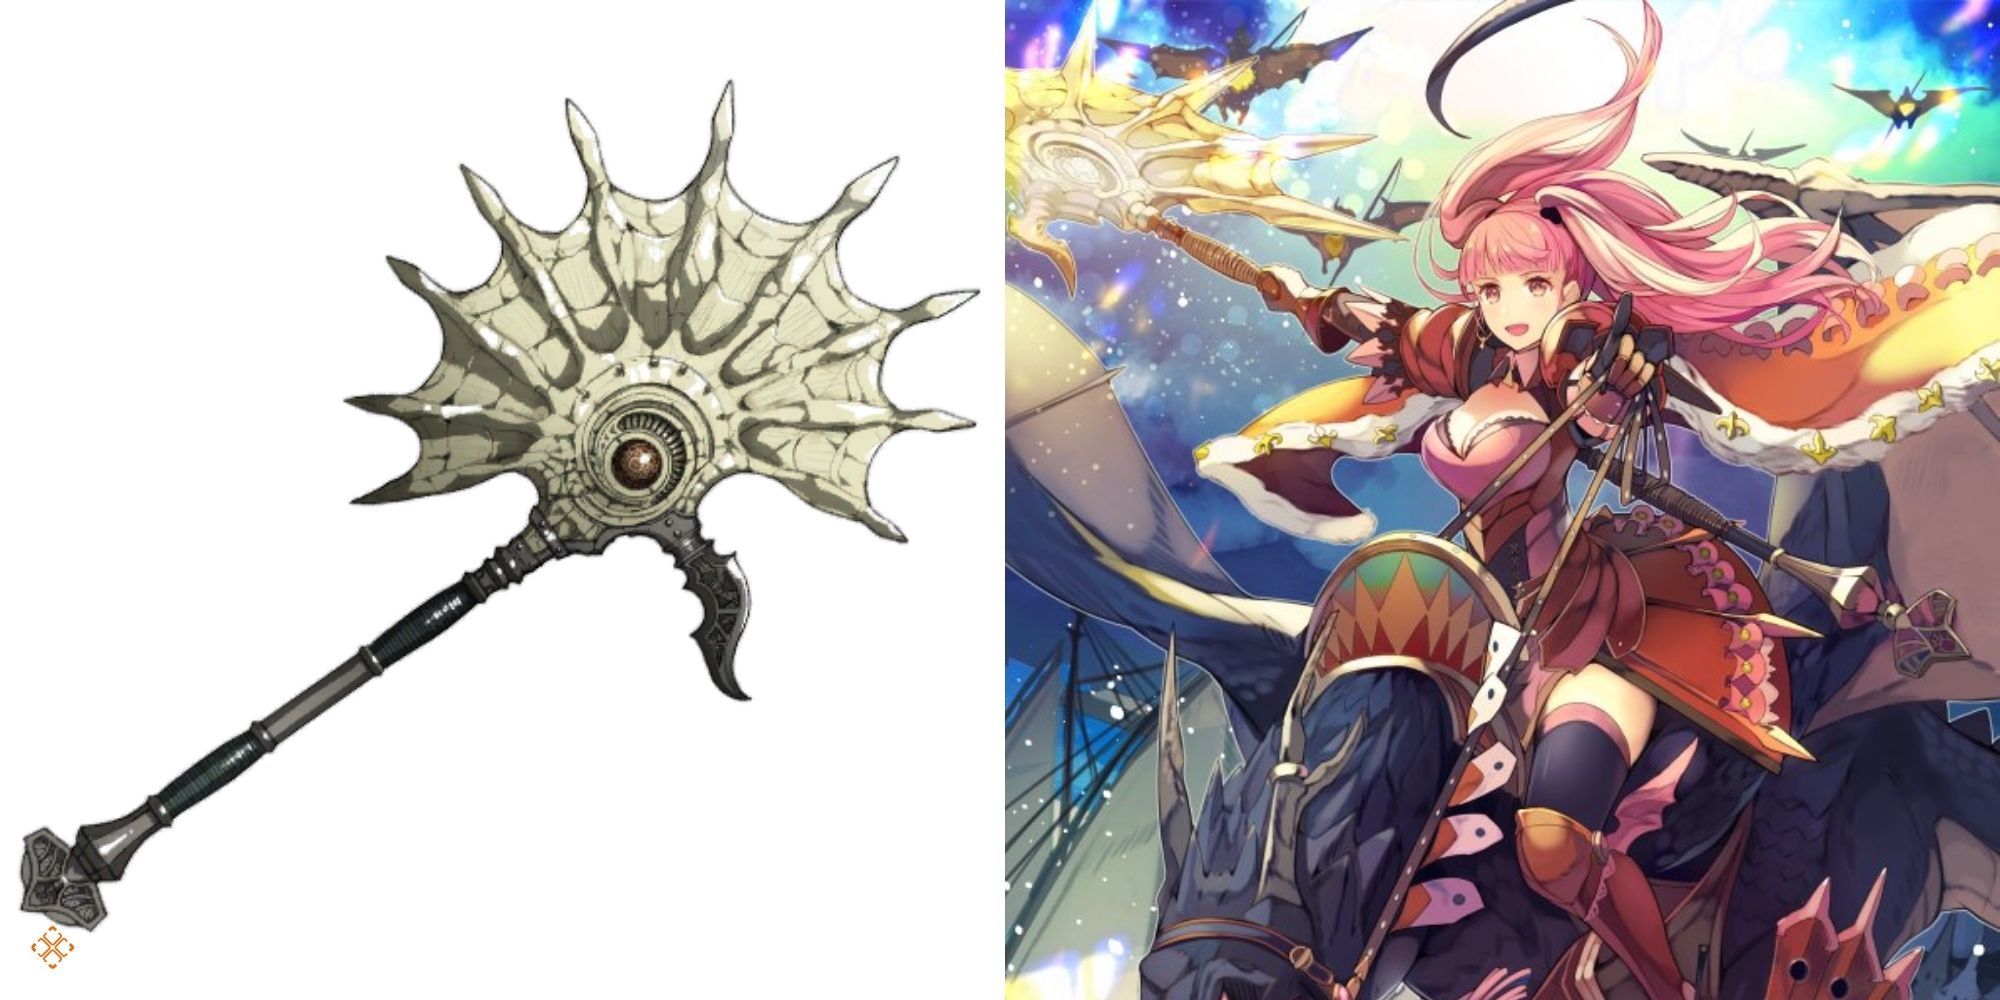 Fire Emblem Three Houses - Freikugel official in-game art on left, Hilda holding the relic in official art on right